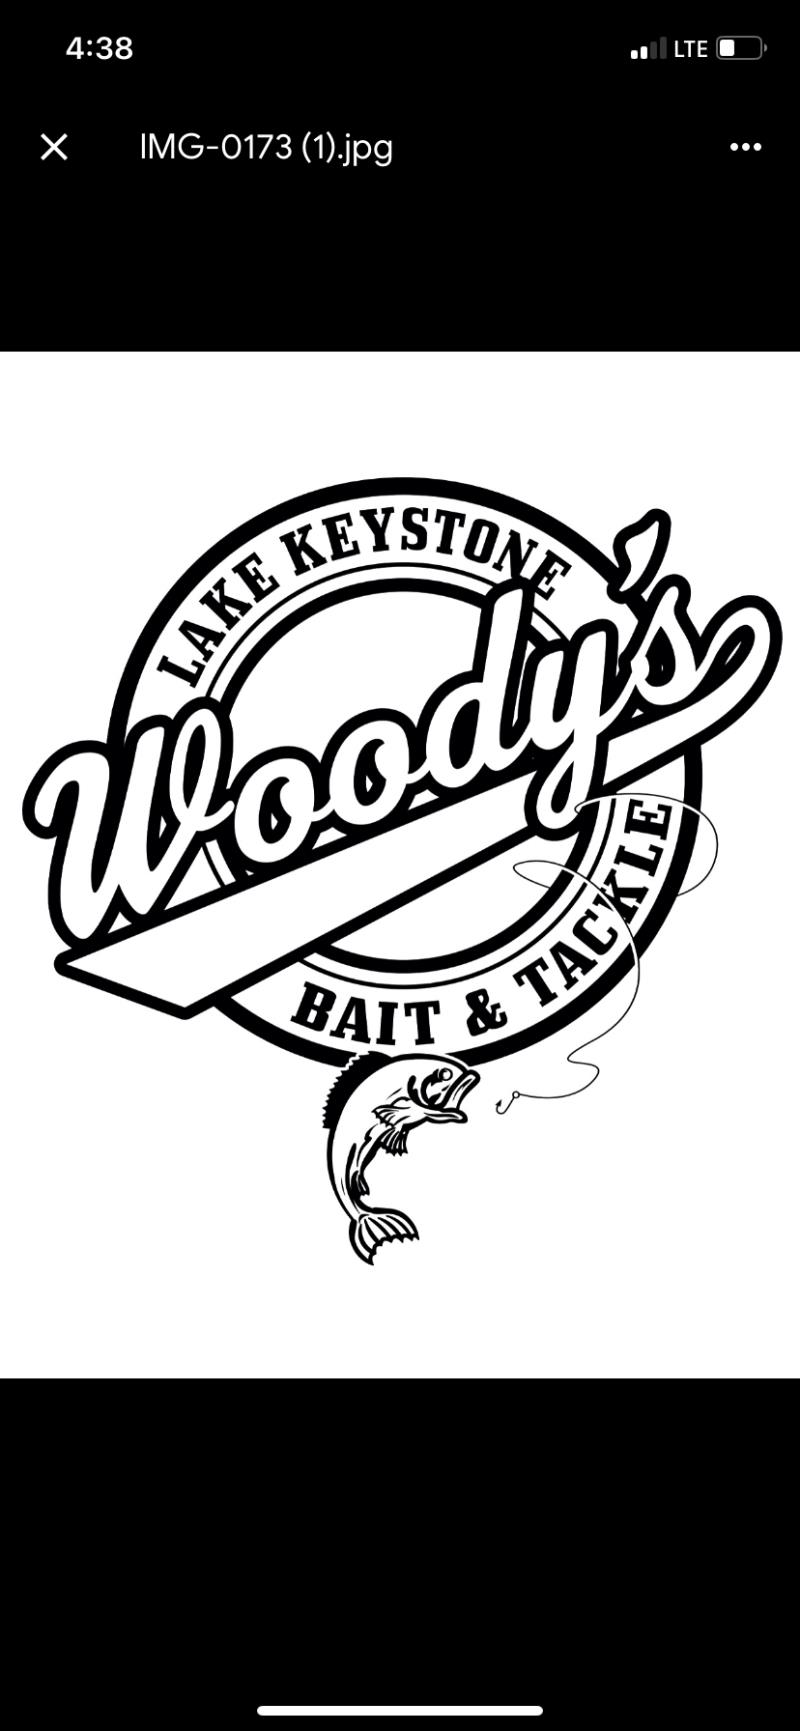 Woody’s Bait & Tackle